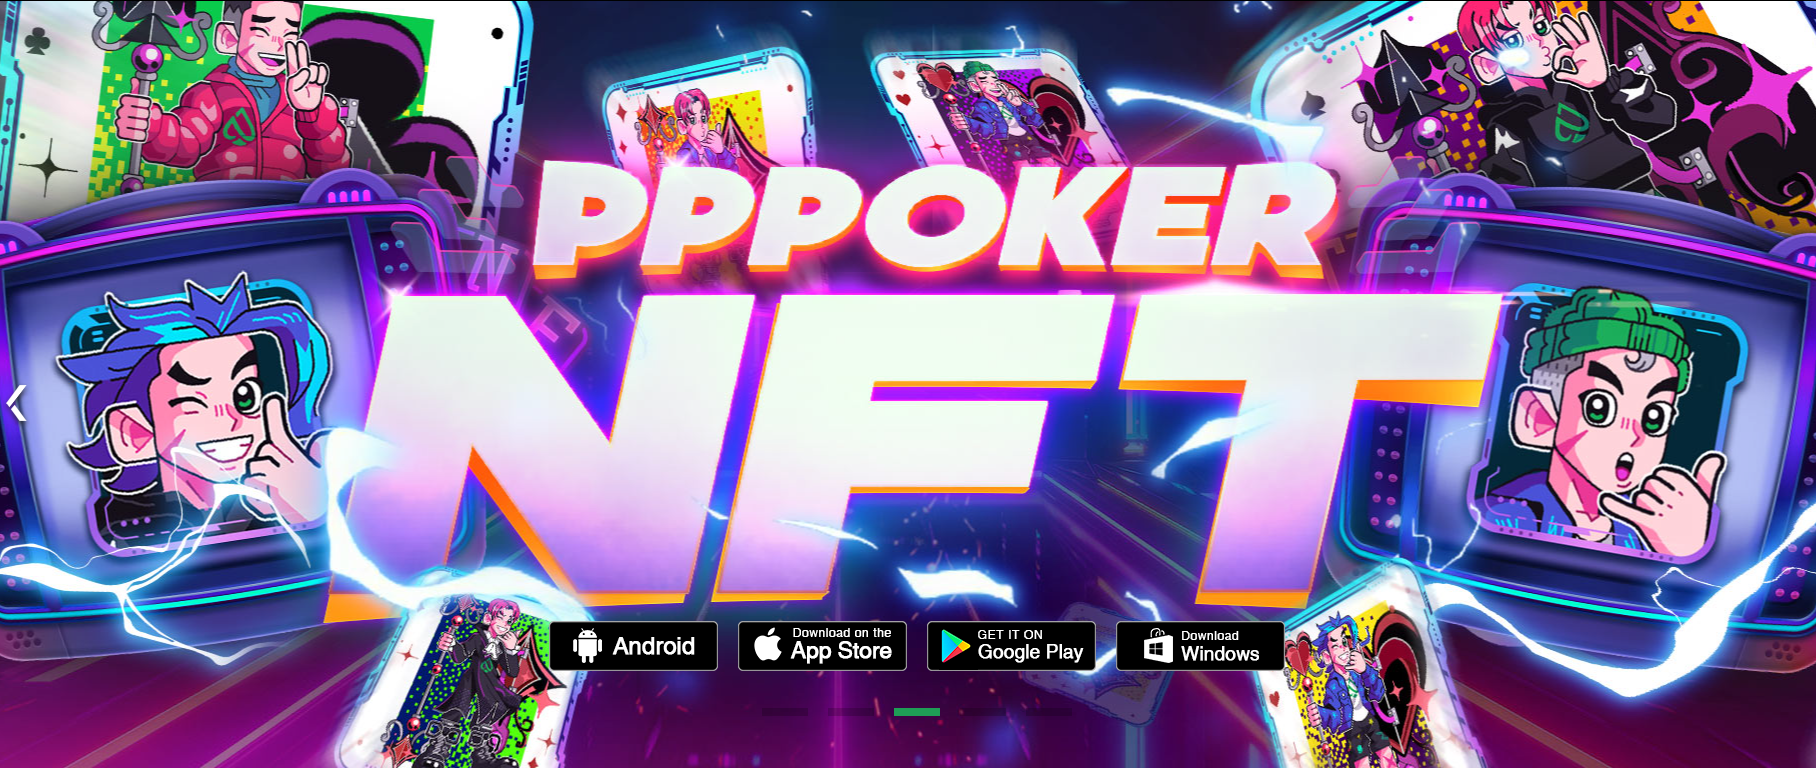 PPPoker(PPポーカー)とは？